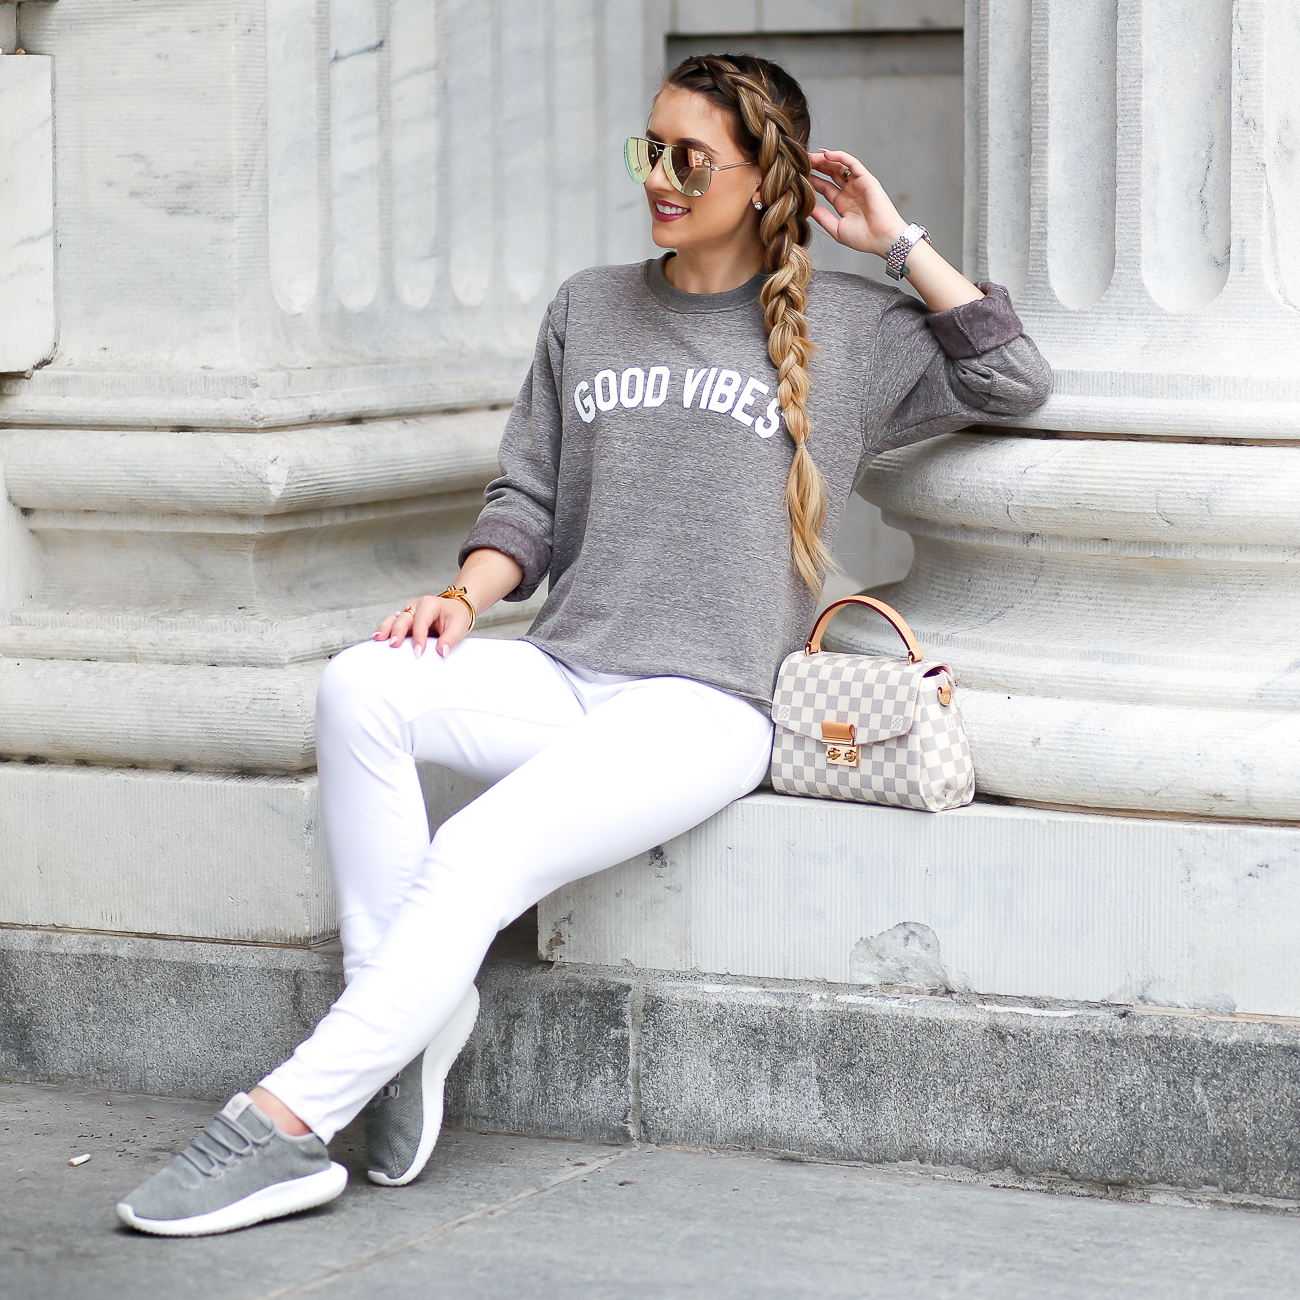 Good Vibes-Comfy Casual Style - Laura Beverlin